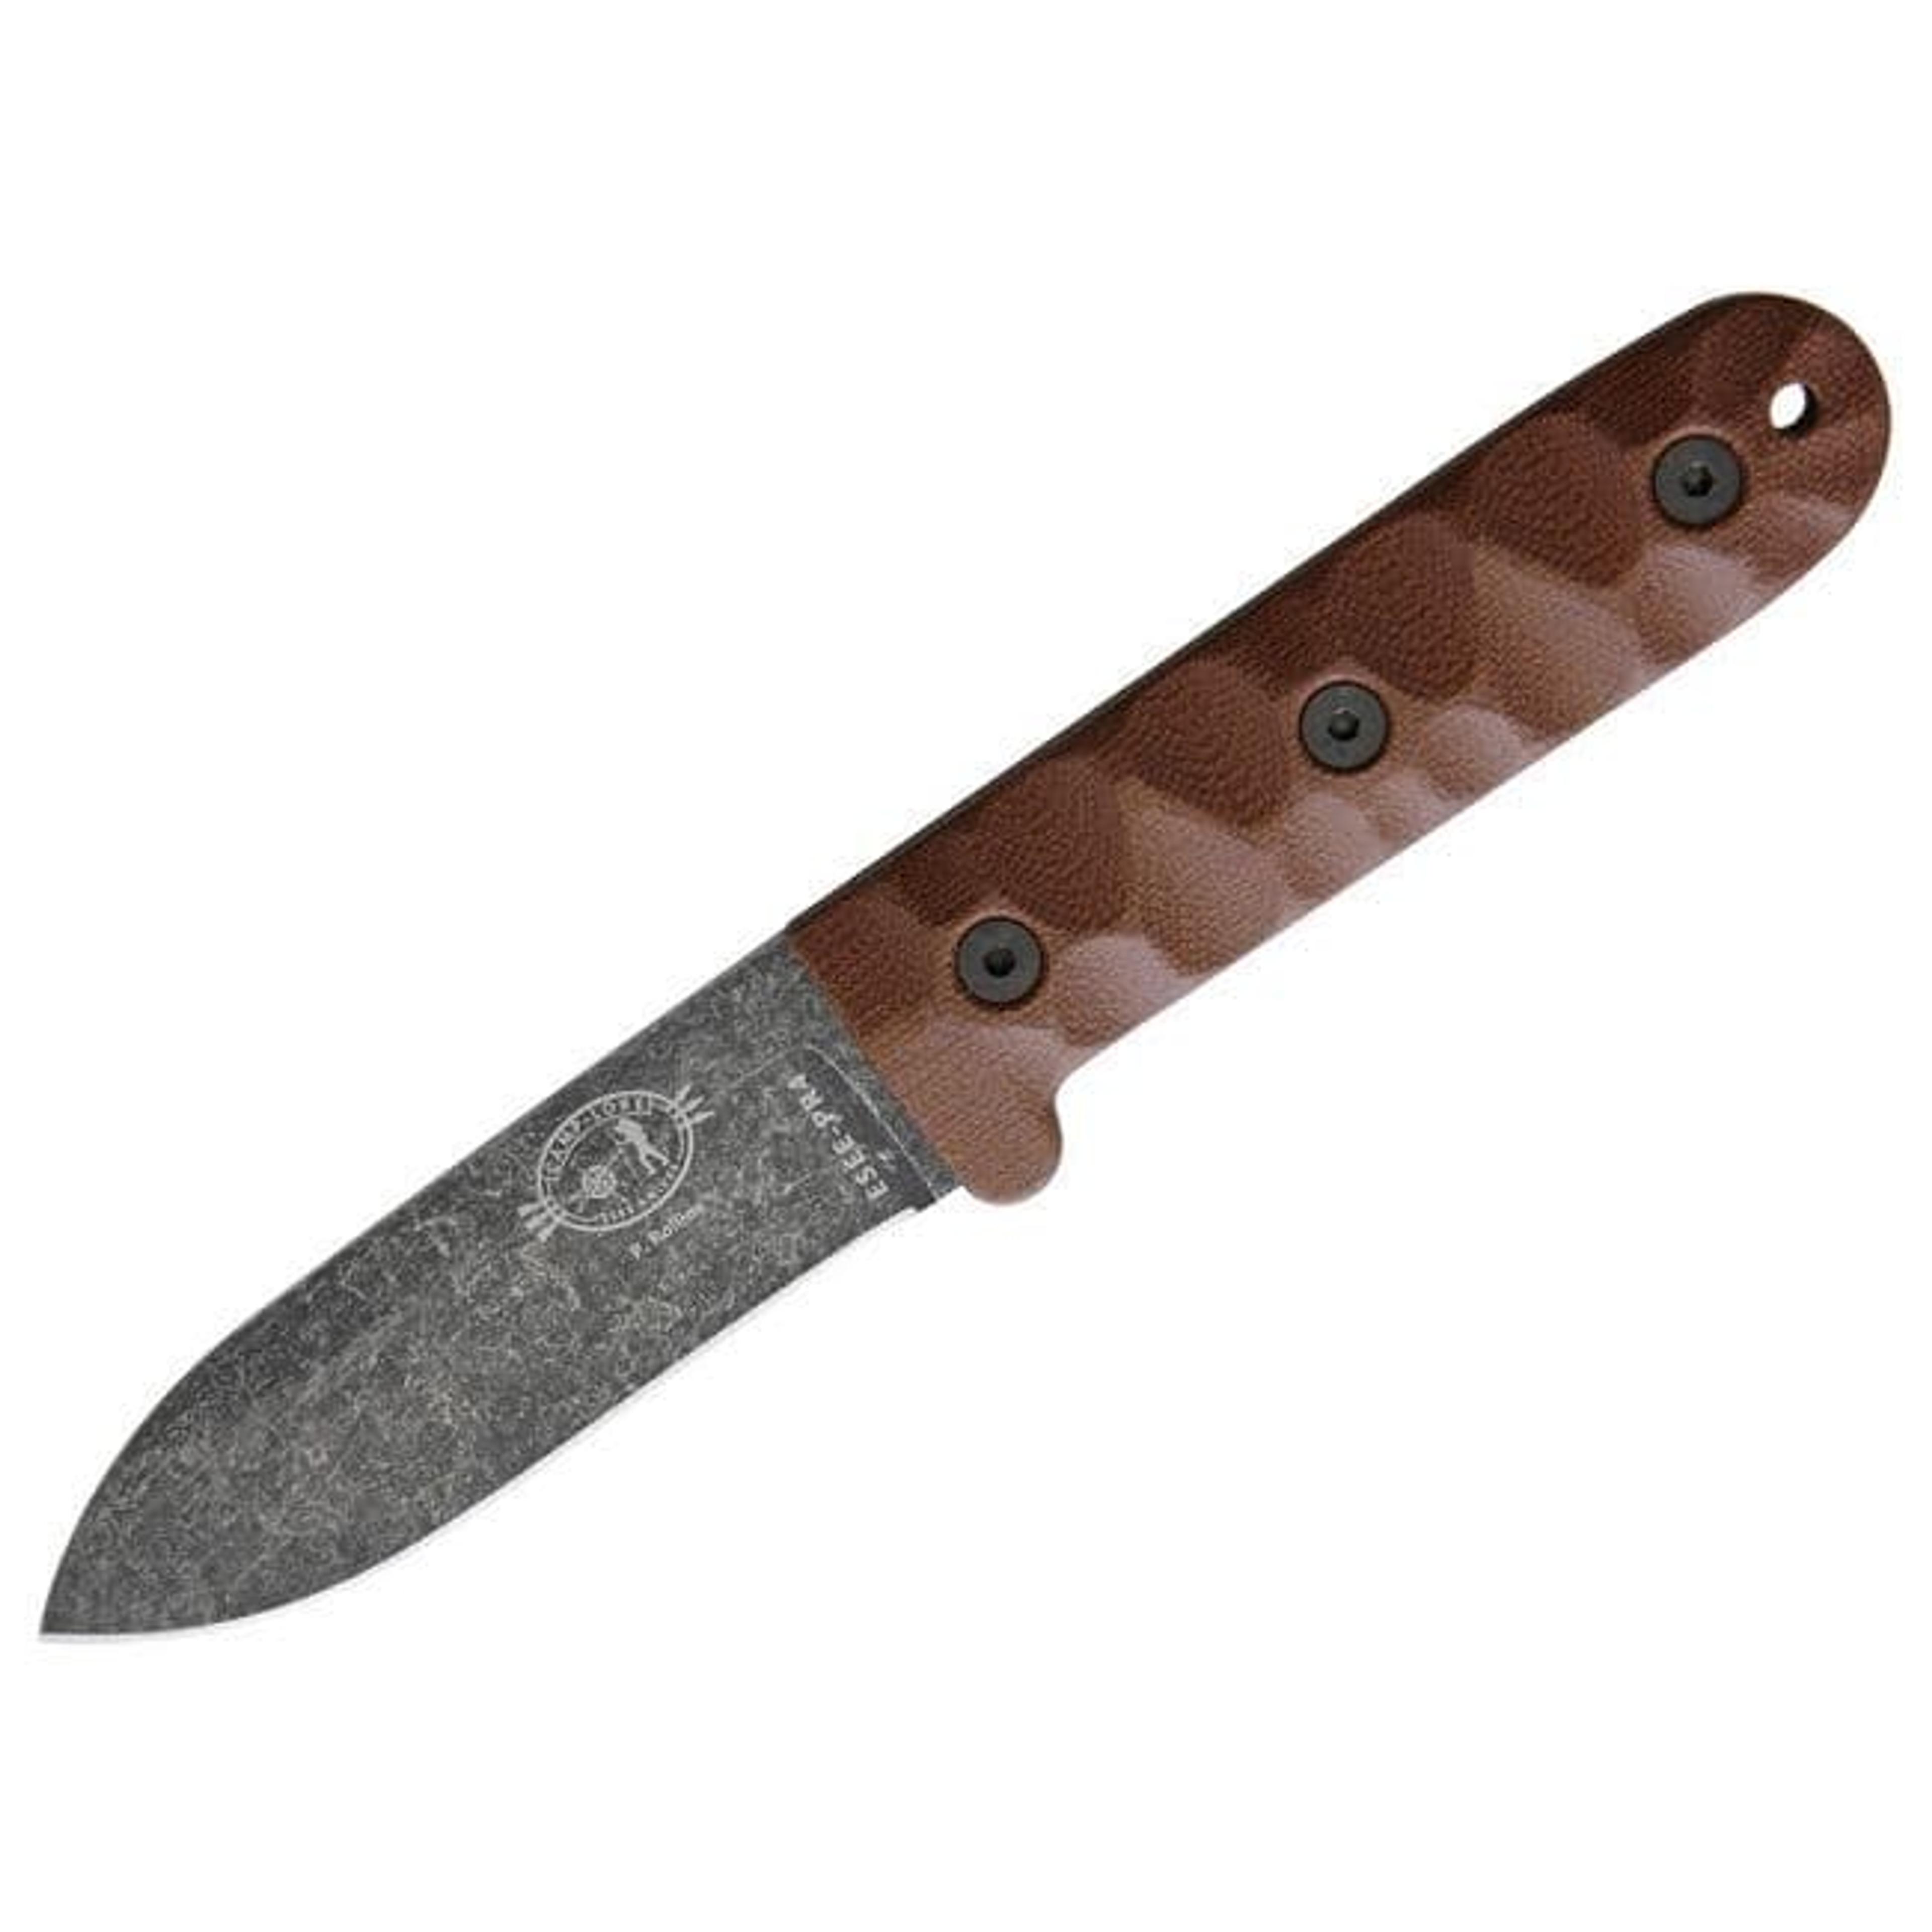 ESEE 3 Survival Knife - Traditional Handle Variant